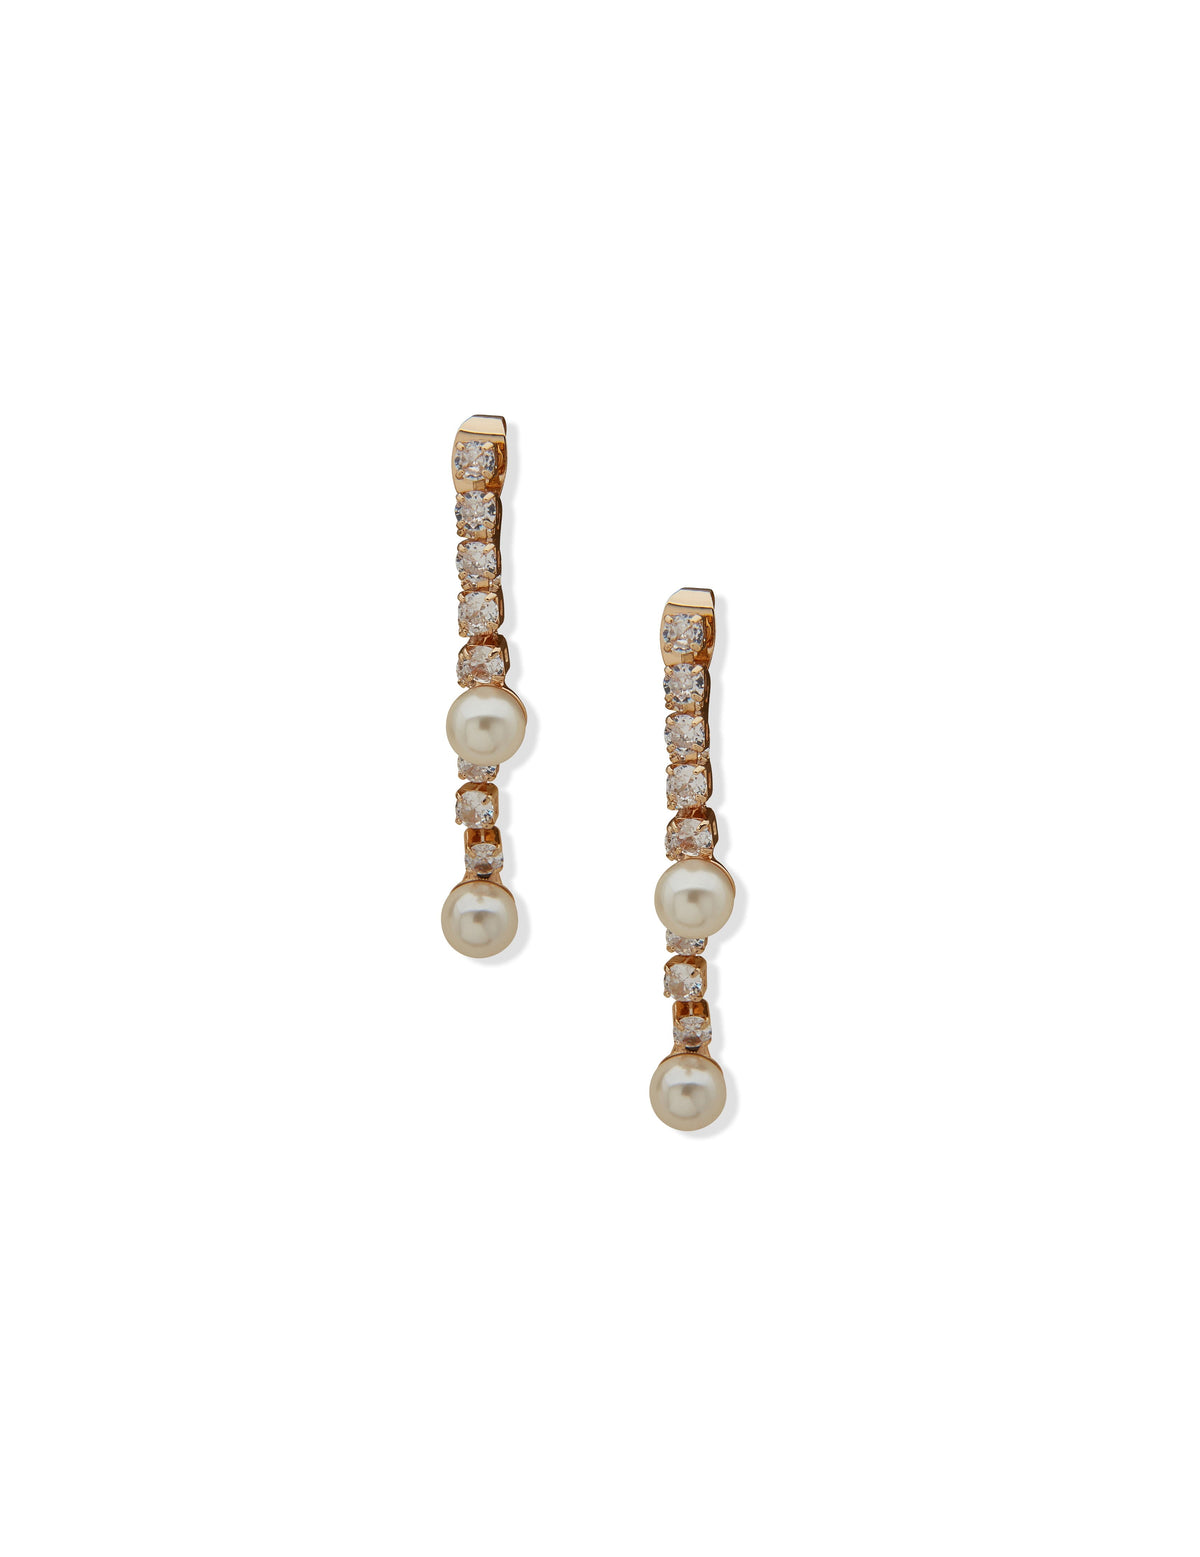 Anne Klein Gold Tone Crystal Linear Earrings With Faux Pearls